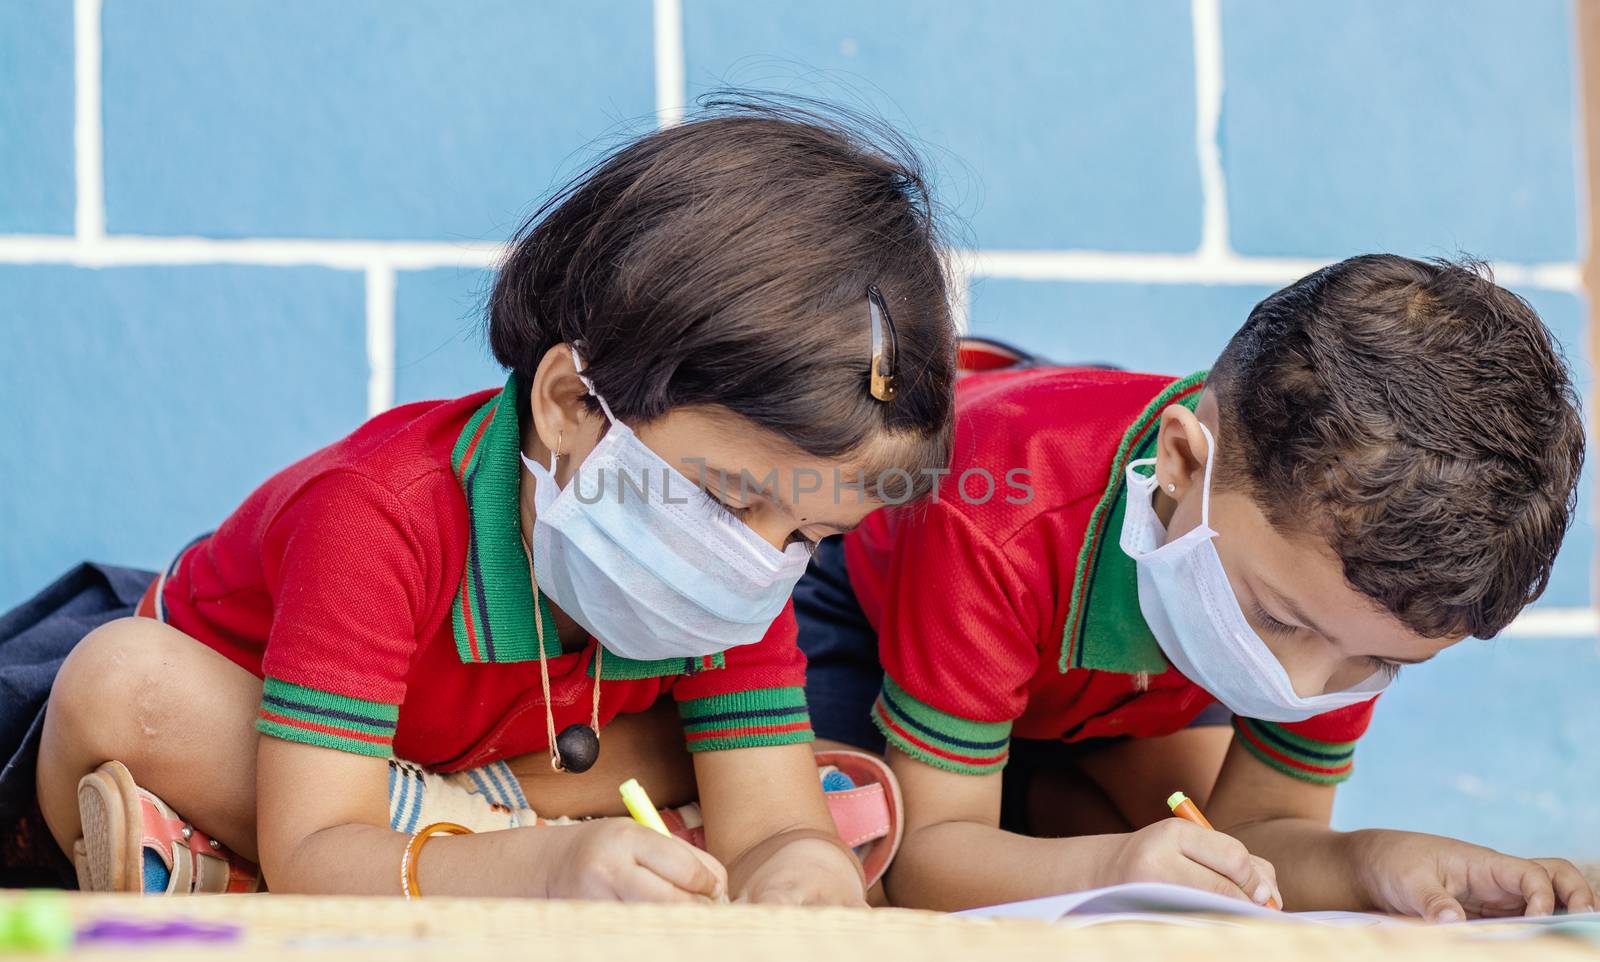 Kids busy in writing with medical face mask wearing due to covid-19 or coronavirus outbreak or pandemic at school.